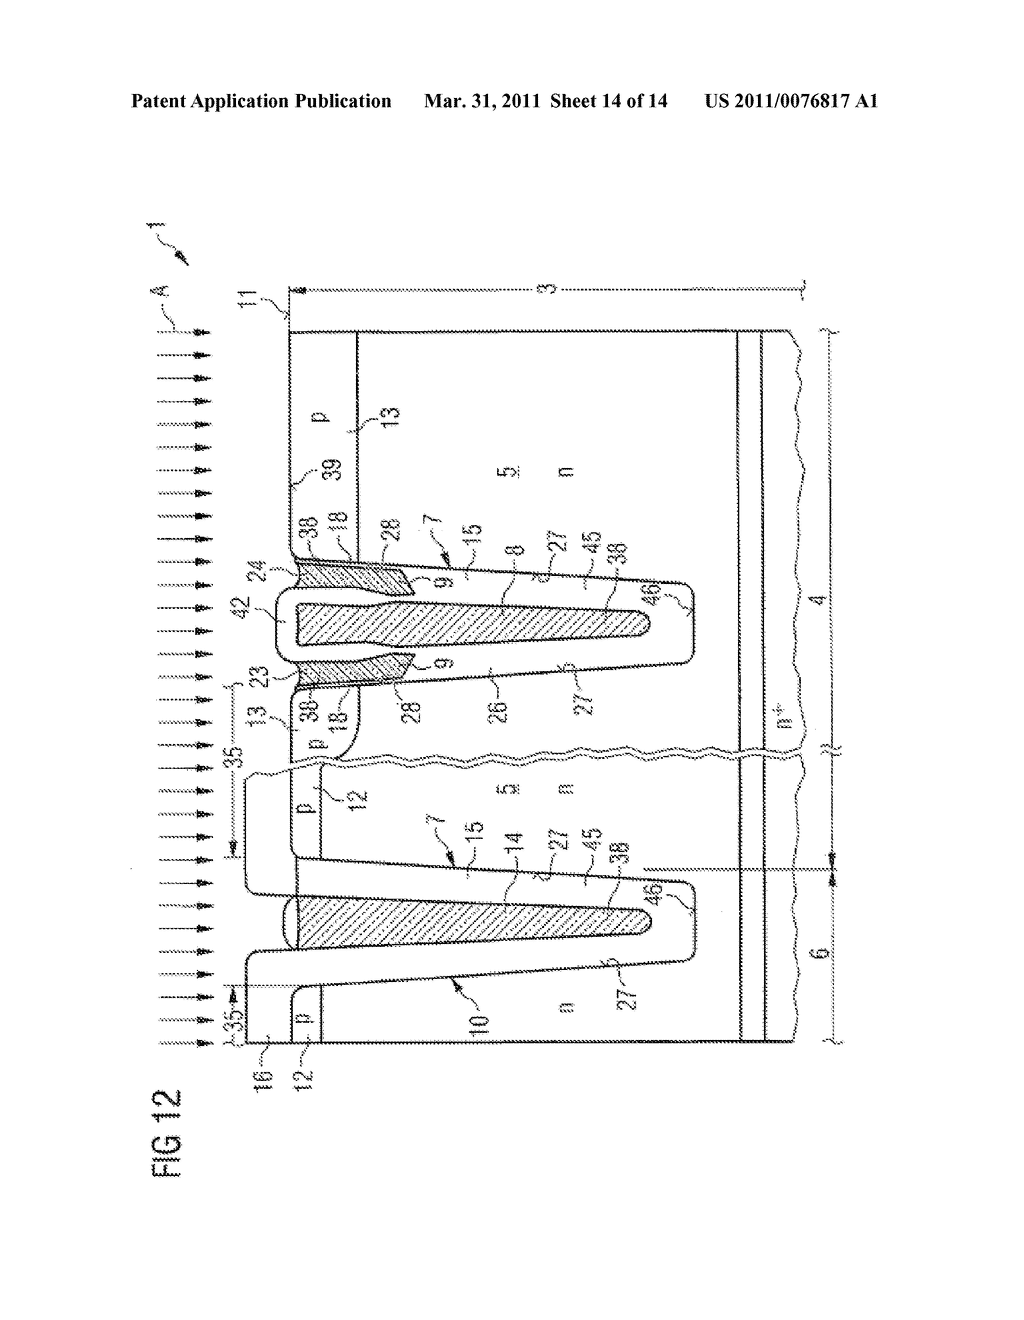 INTEGRATED CIRCUIT DEVICE WITH A SEMICONDUCTOR BODY AND METHOD FOR THE PRODUCTION OF AN INTEGRATED CIRCUIT DEVICE - diagram, schematic, and image 15